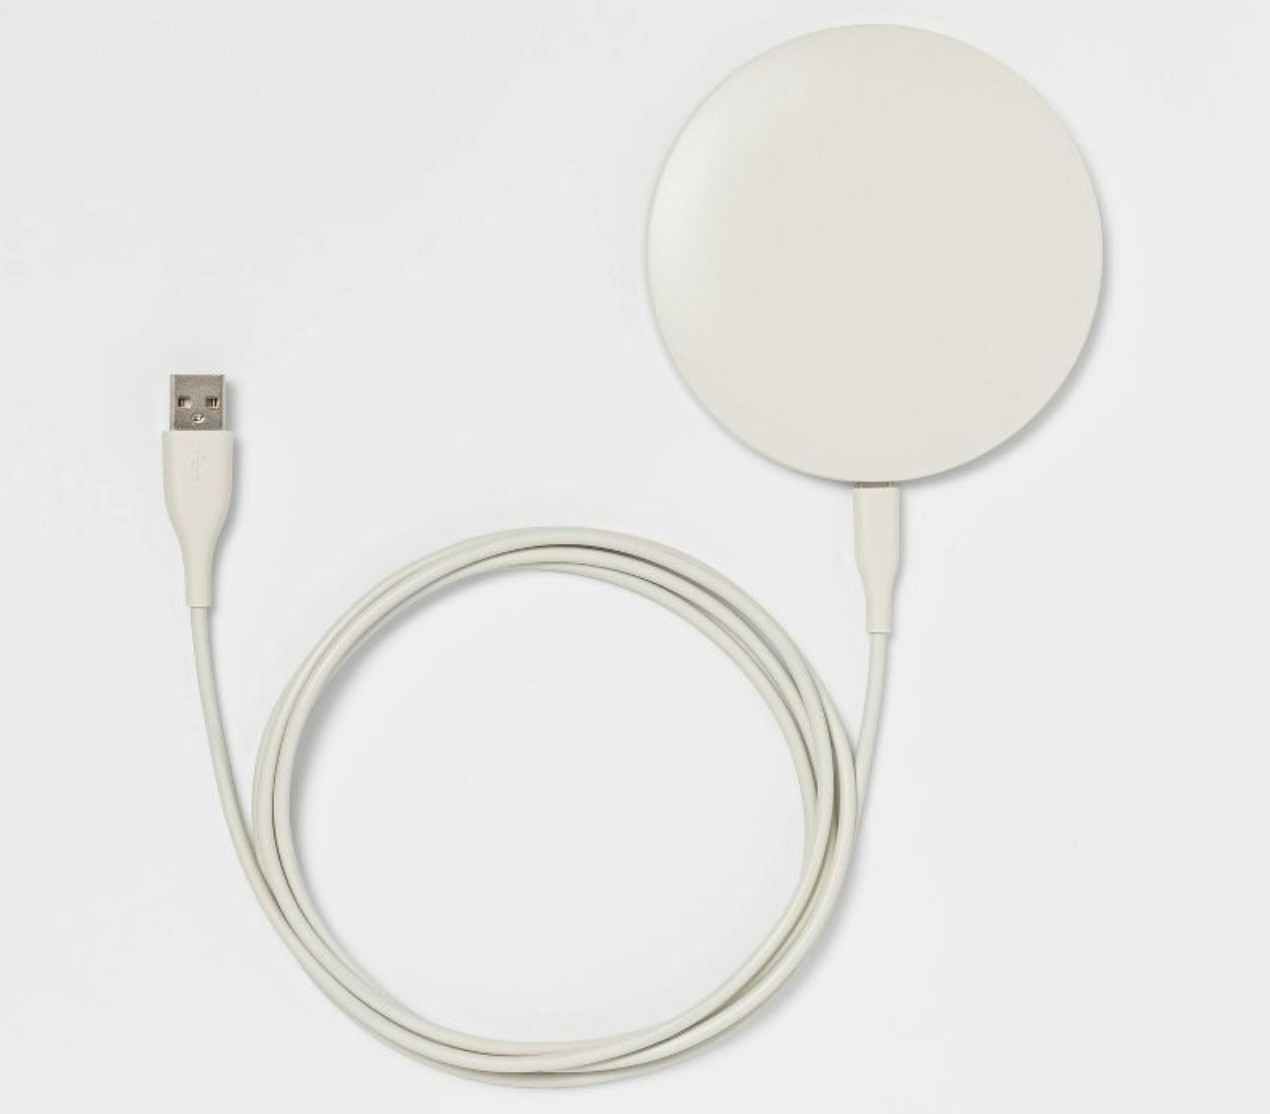 stock photo of a white phone charging puck from Target